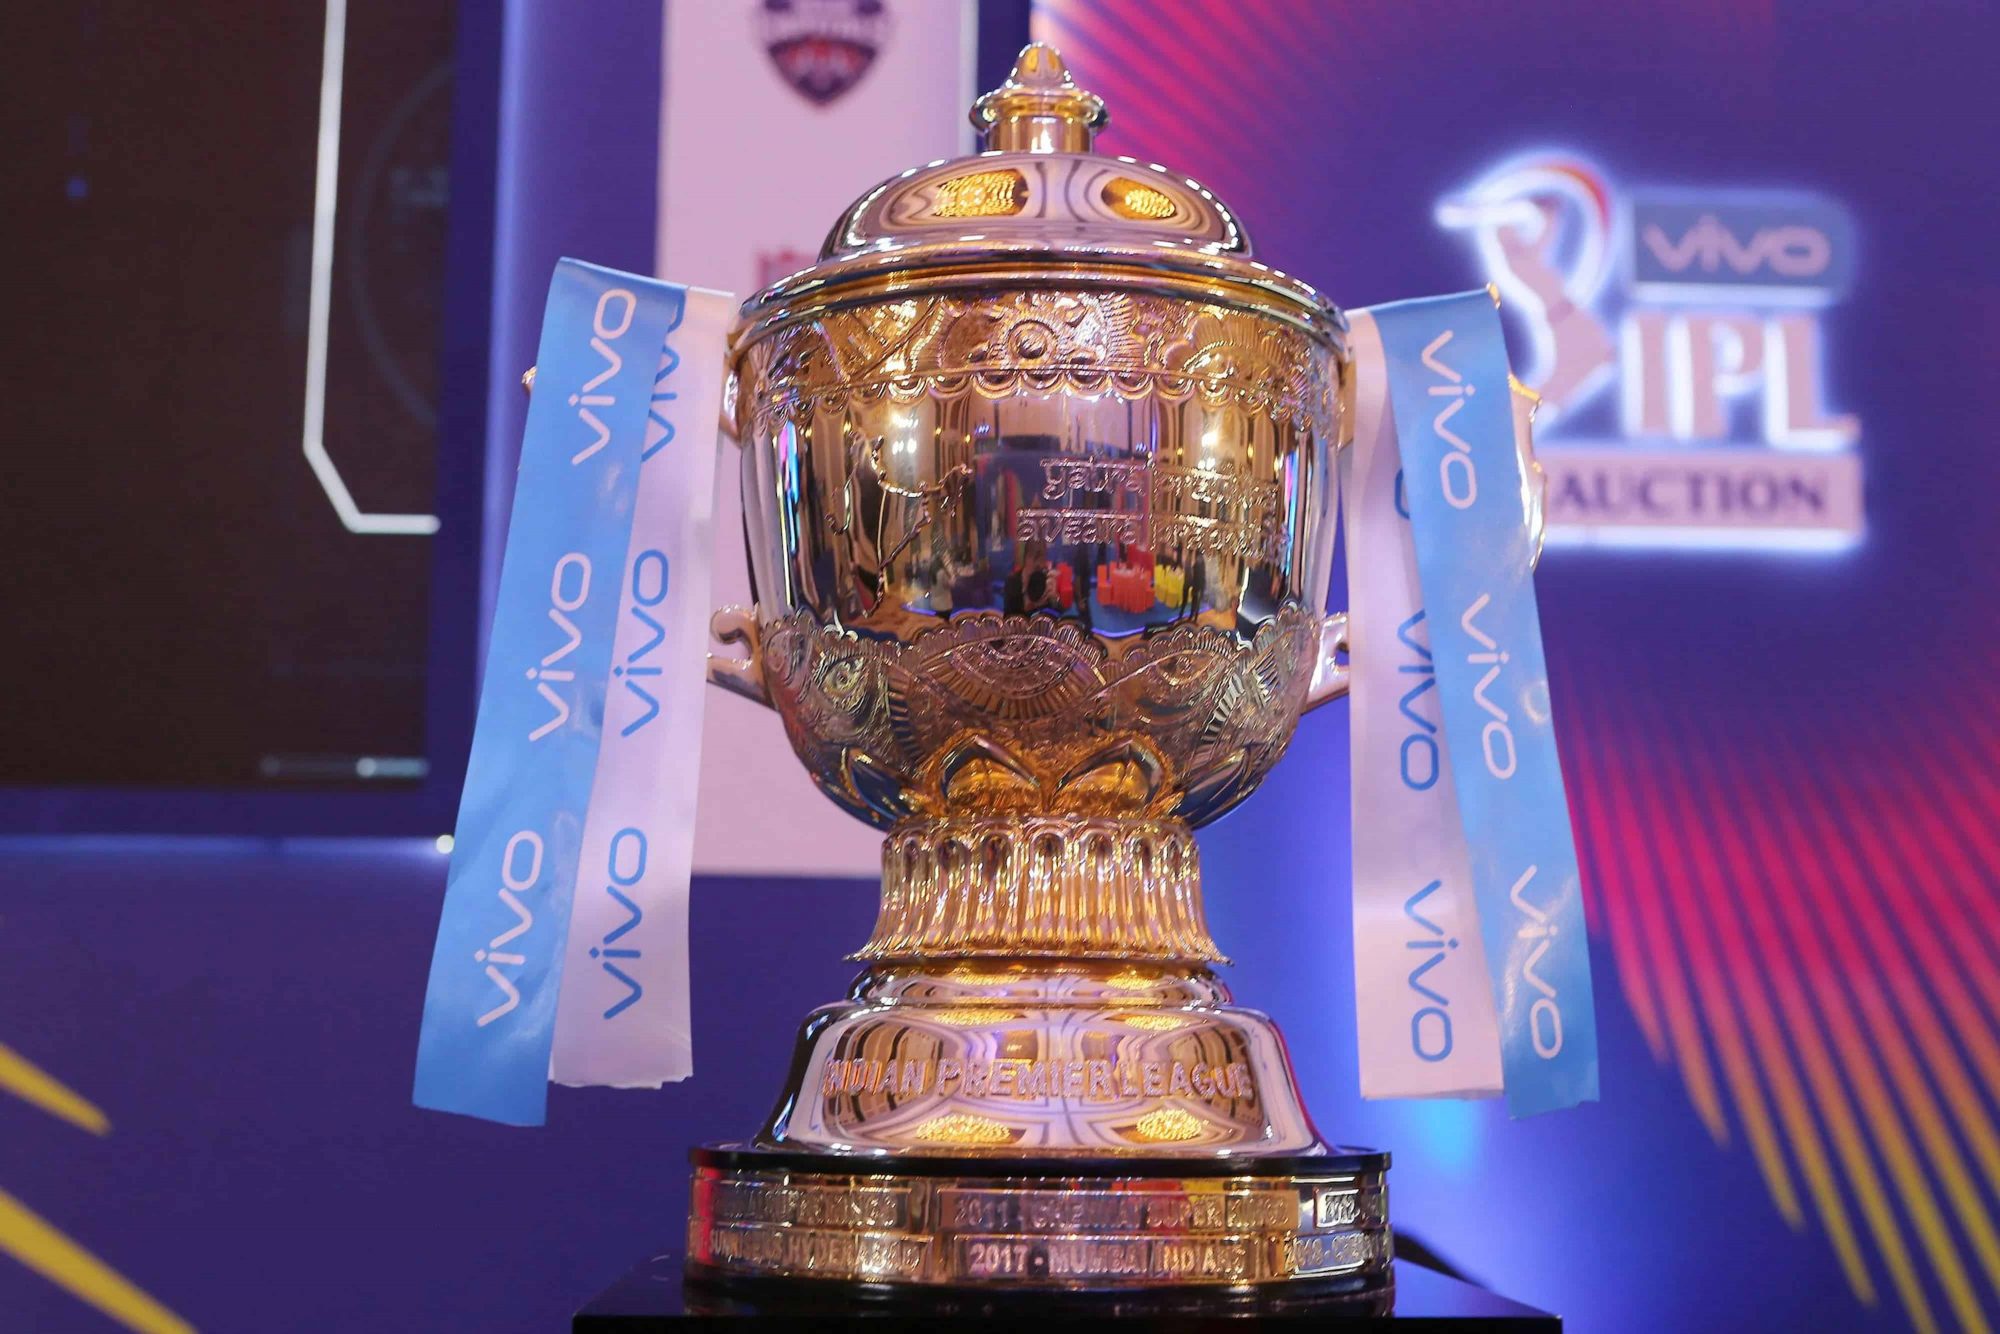 IPL Auction 2021: Complete List of Team Wise Sold & Unsold Players